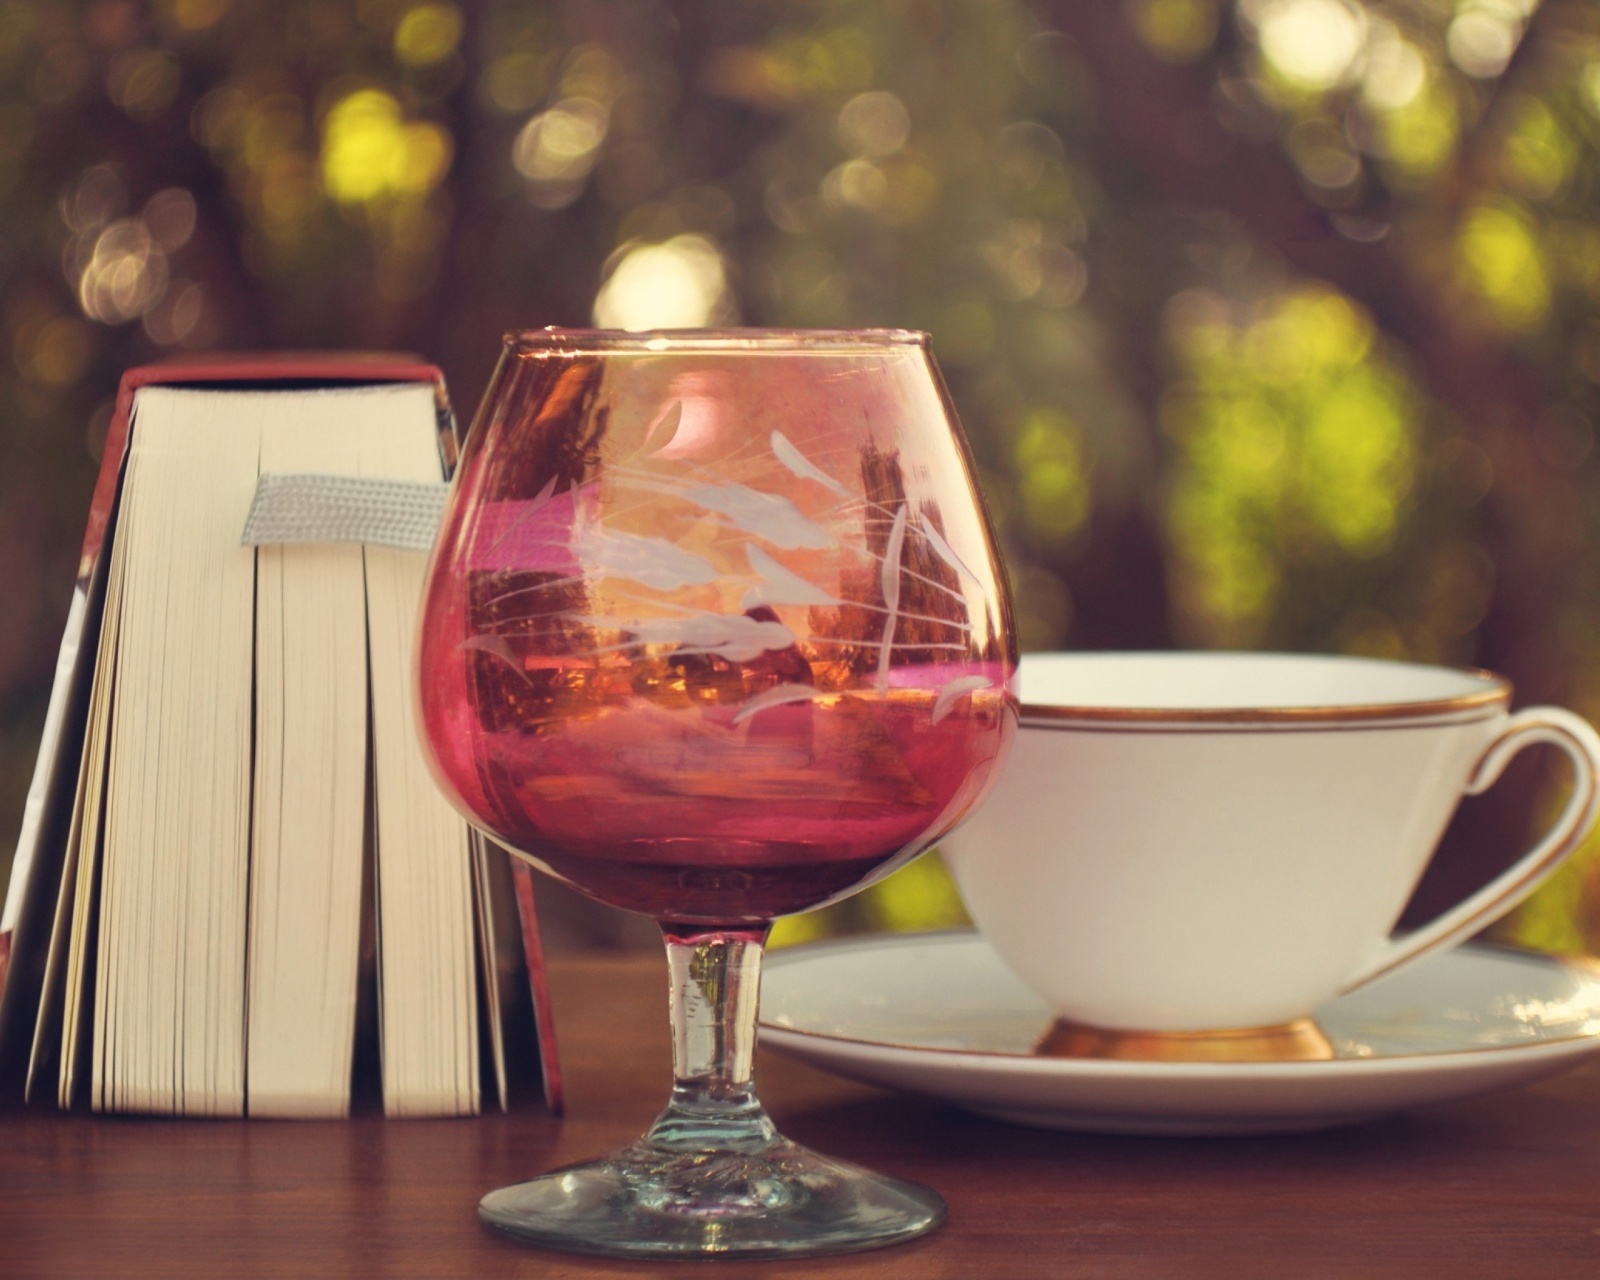 Perfect day with wine and book screenshot #1 1600x1280